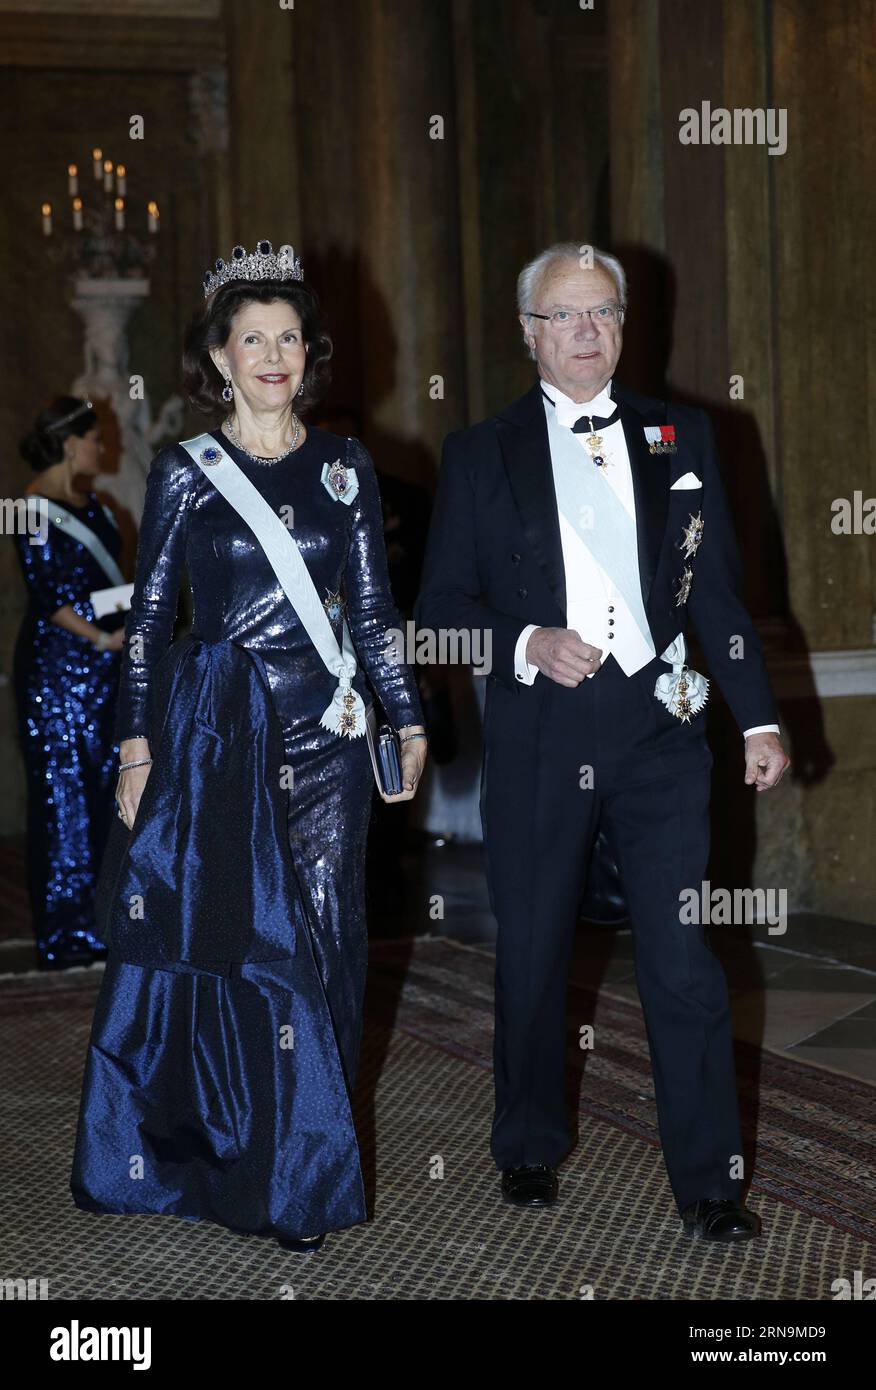 (151211) -- STOCKHOLM, Dec. 11, 2015 -- Sweden s King Carl XVI Gustaf and Queen Silvia attend the royal banquet for Nobel laureates at Royal Palace in Stockholm, Sweden, Dec. 11, 2015. ) SWEDEN-STOCKHOLM-NOBEL-PRIZE-ROYAL-BANQUET YexPingfan PUBLICATIONxNOTxINxCHN   151211 Stockholm DEC 11 2015 Sweden S King Carl XVI Gustaf and Queen Silvia attend The Royal Banquet for Nobel Laureates AT Royal Palace in Stockholm Sweden DEC 11 2015 Sweden Stockholm Nobel Prize Royal Banquet YexPingfan PUBLICATIONxNOTxINxCHN Stock Photo